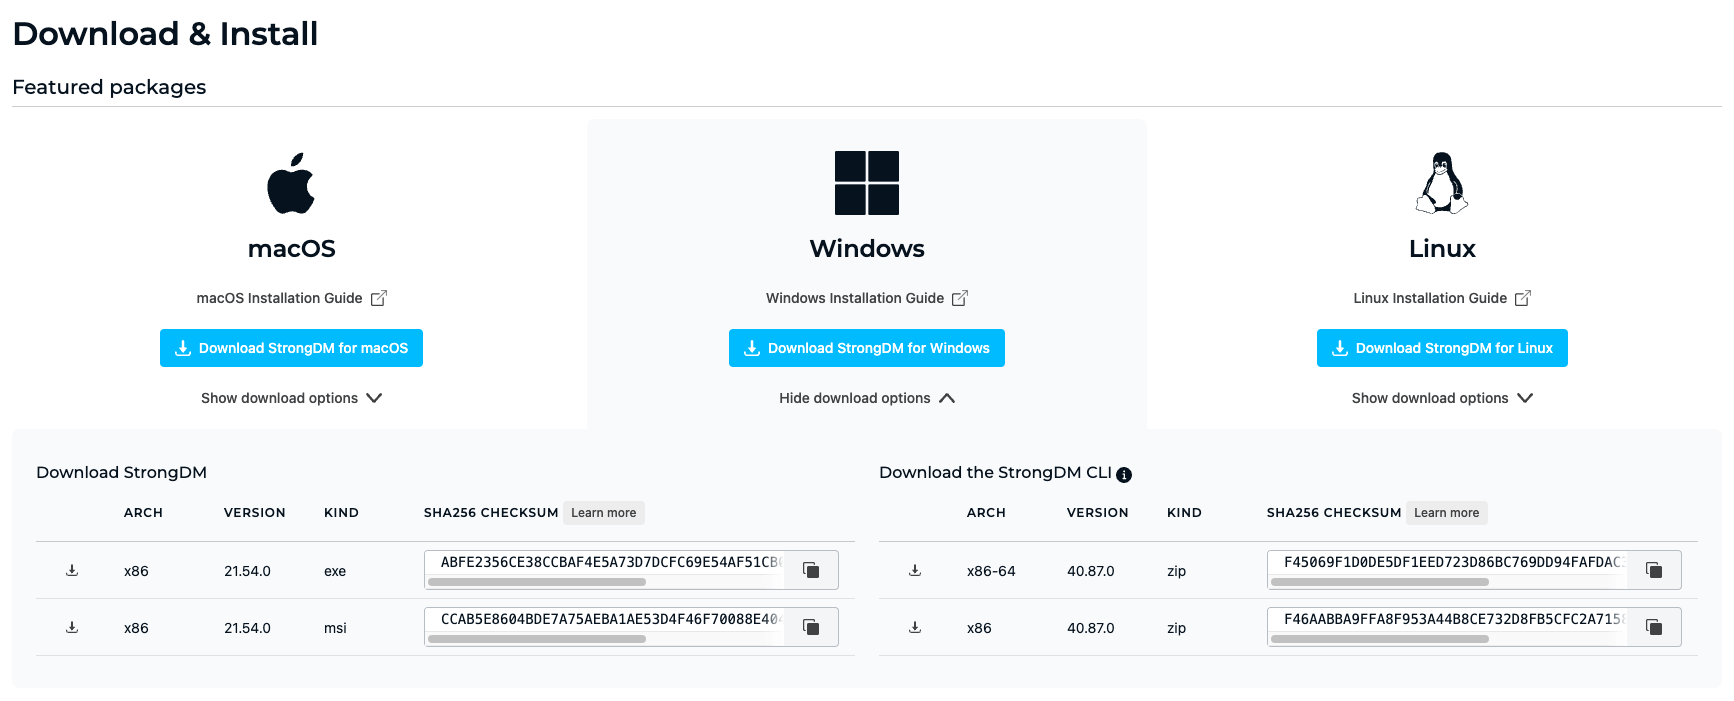 Example of Admin UI Download & Install Page